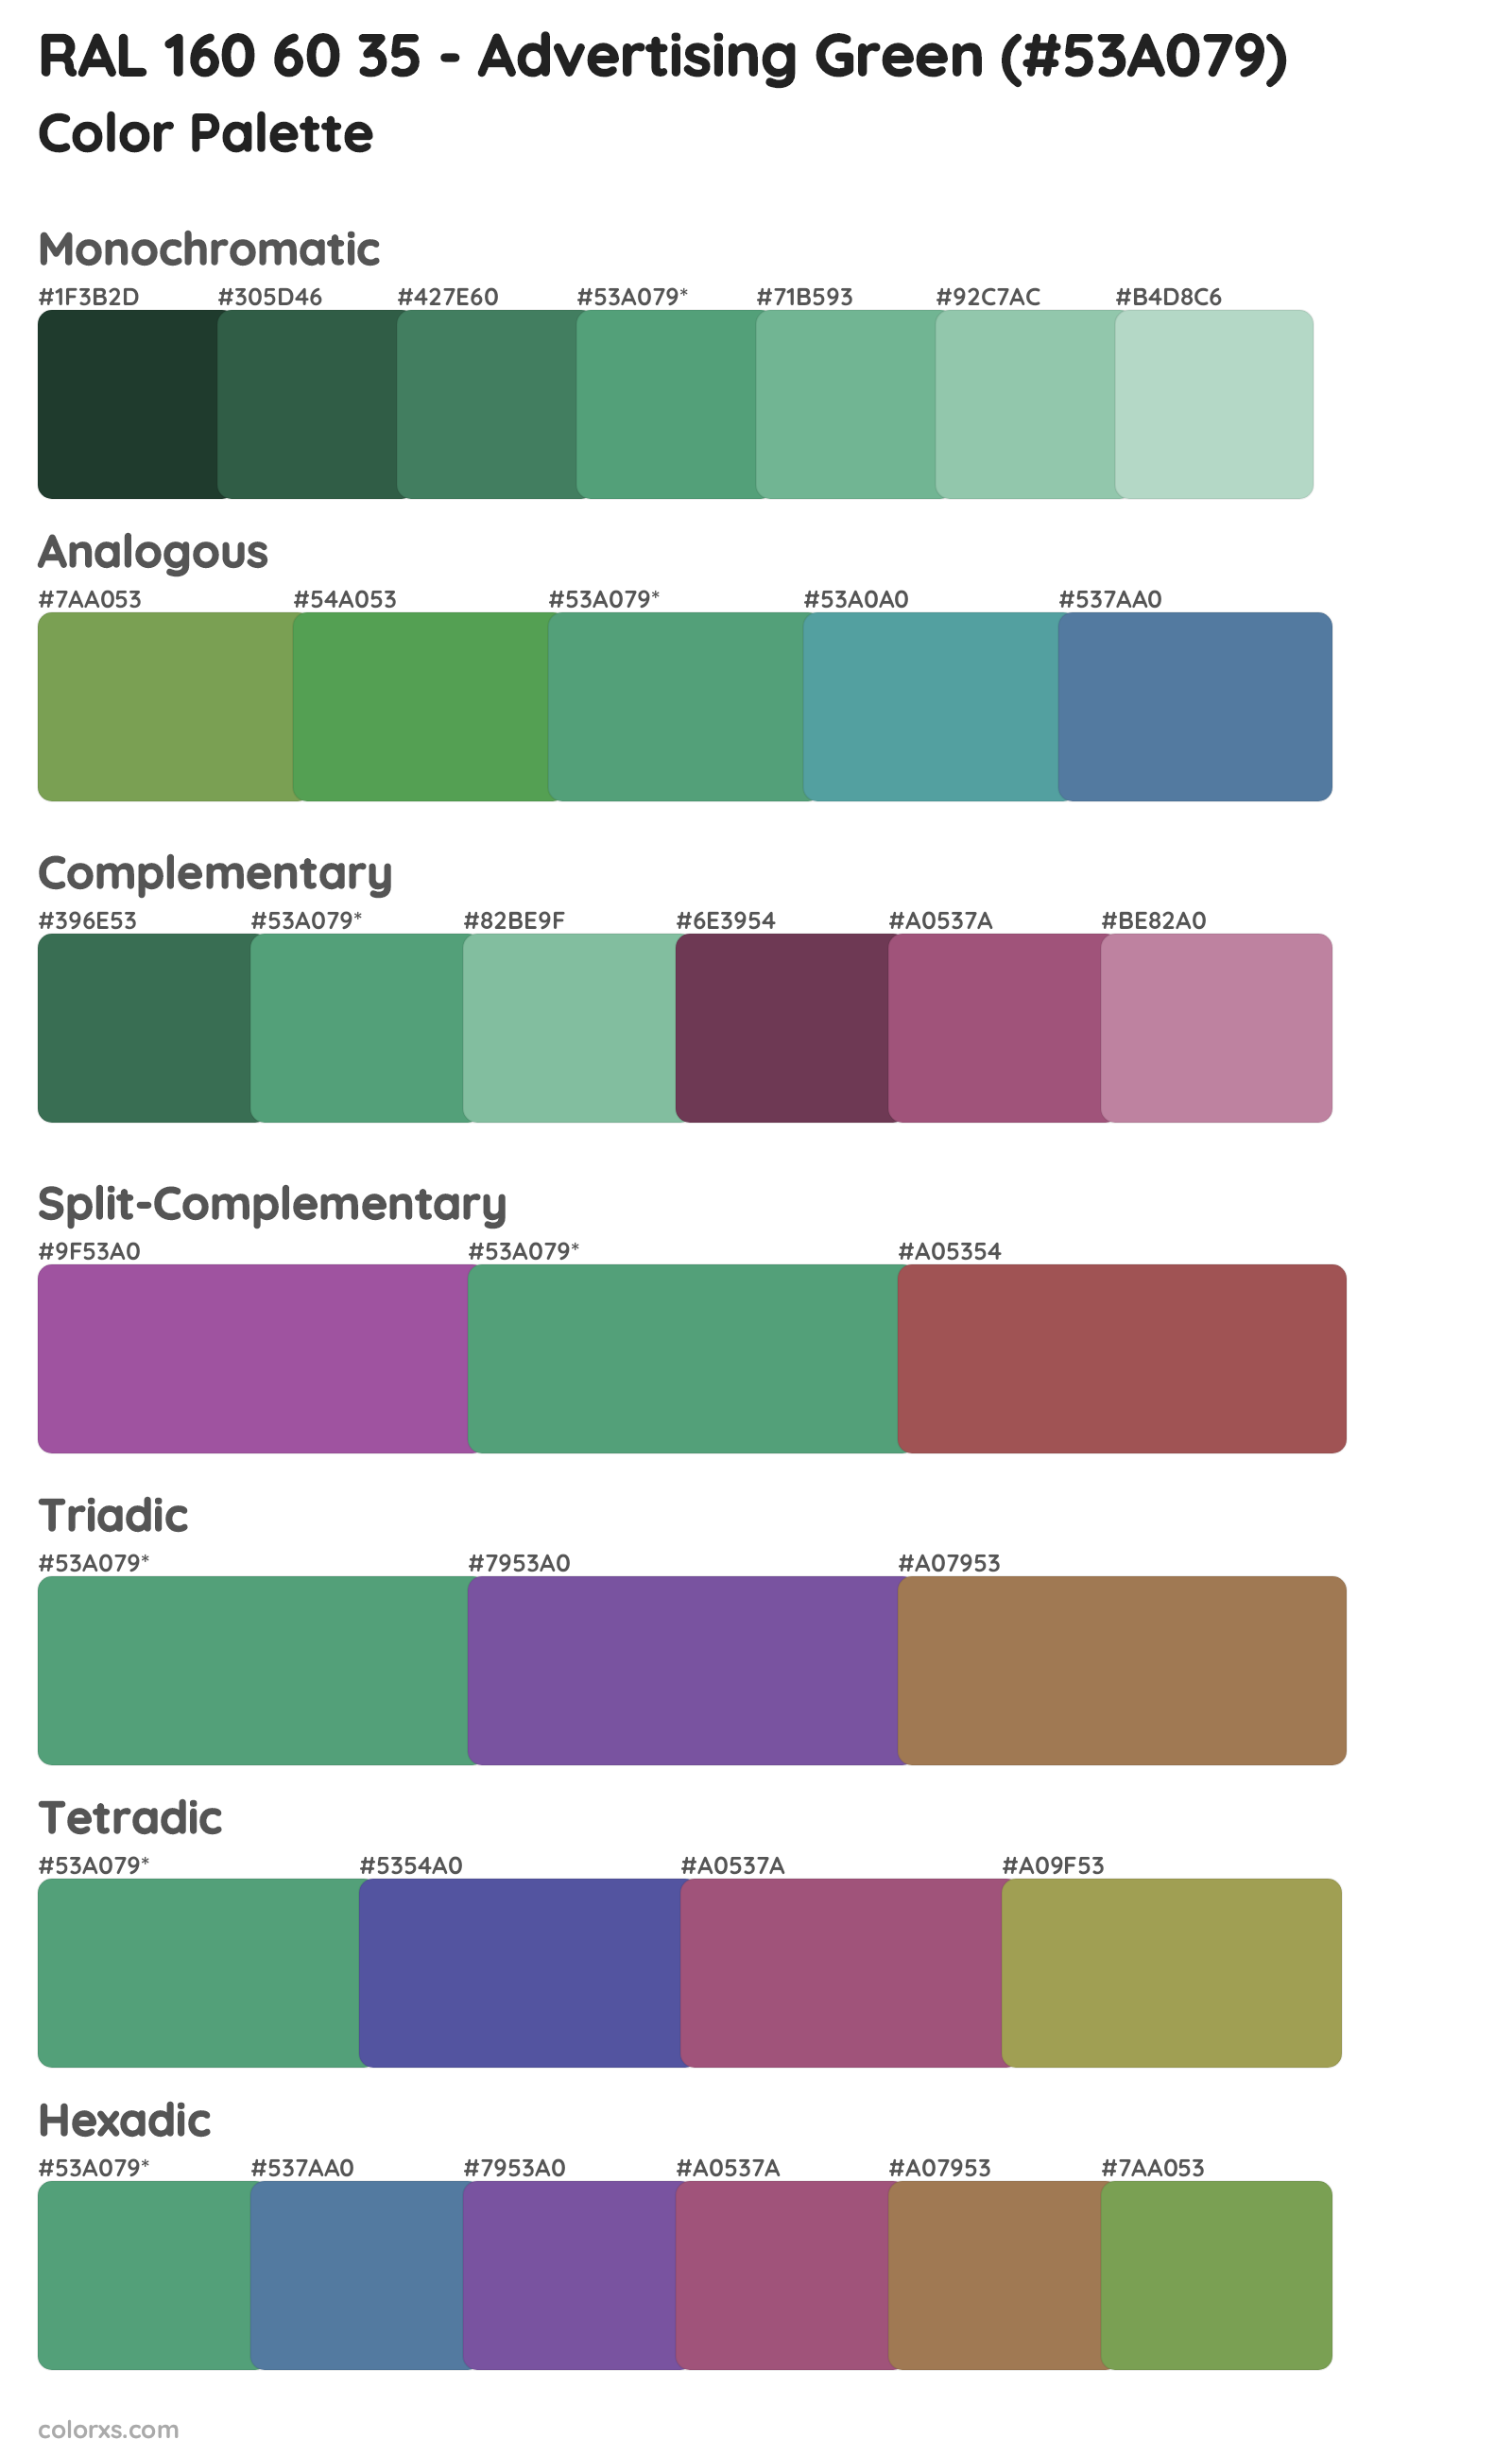 RAL 160 60 35 - Advertising Green Color Scheme Palettes